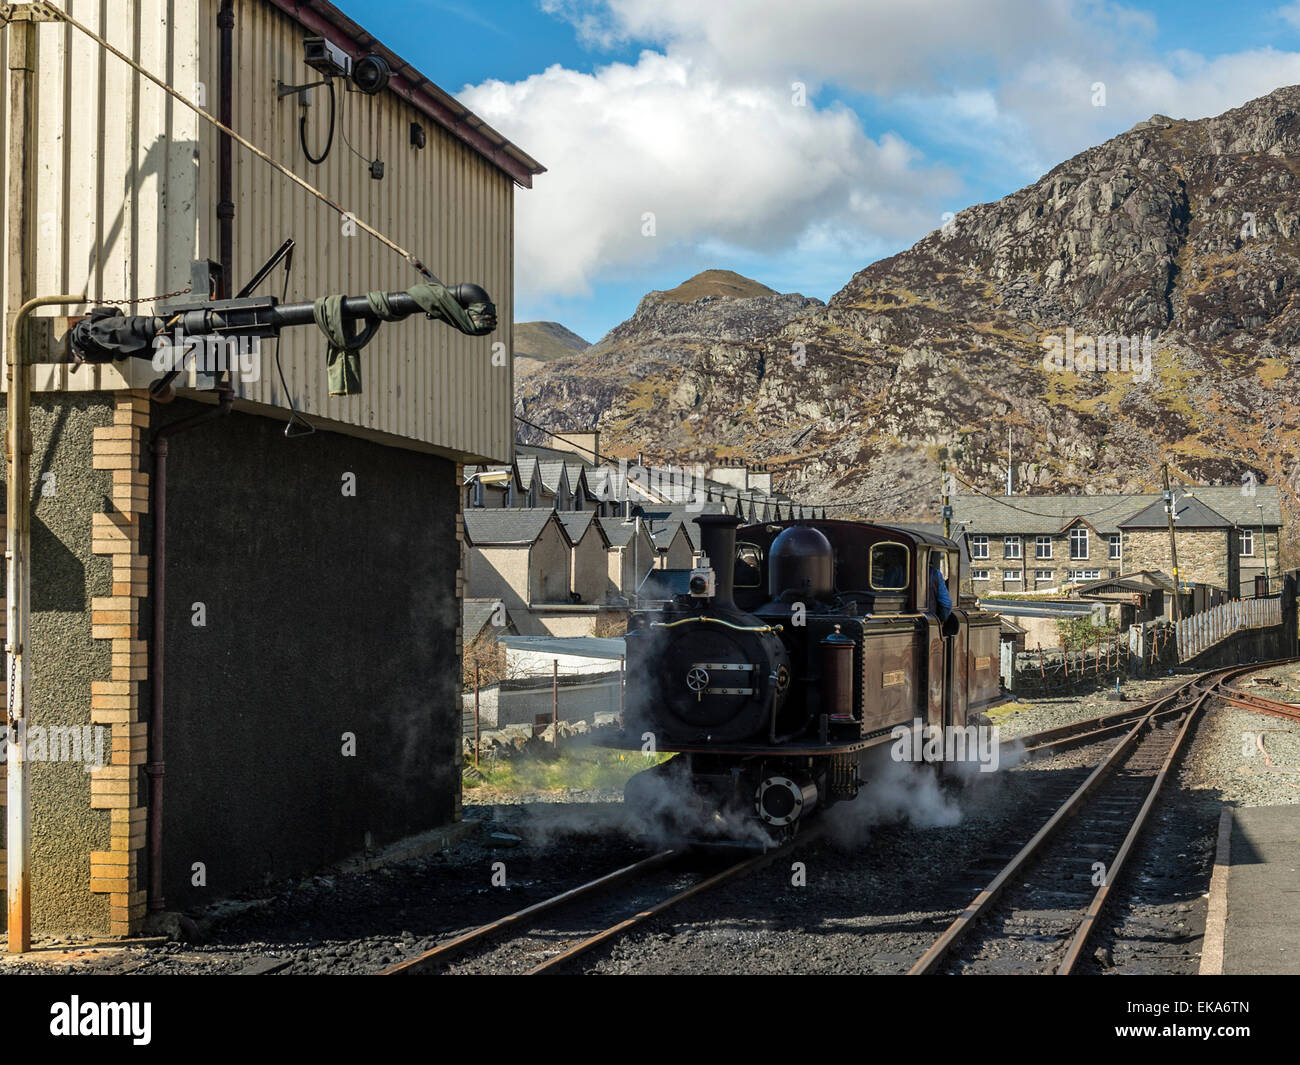 The Merddin Emrys, Double Fairlie locomotive lets off steam at the Blaenau Ffestiniog water tower. Stock Photo